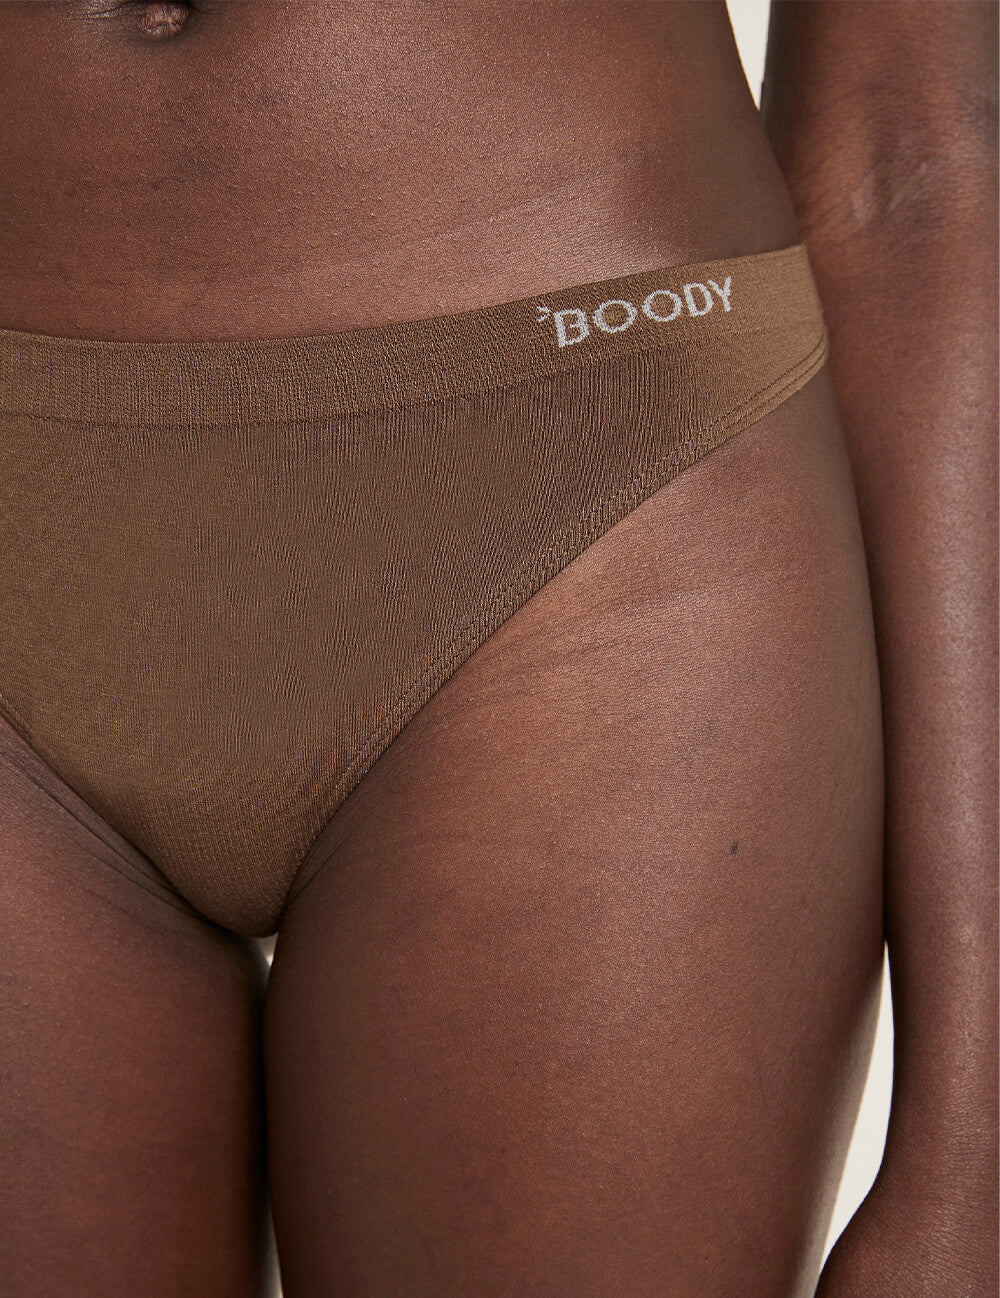 Boody Bamboo G-String Thong Womens Underwear in Nude 6 Close Up